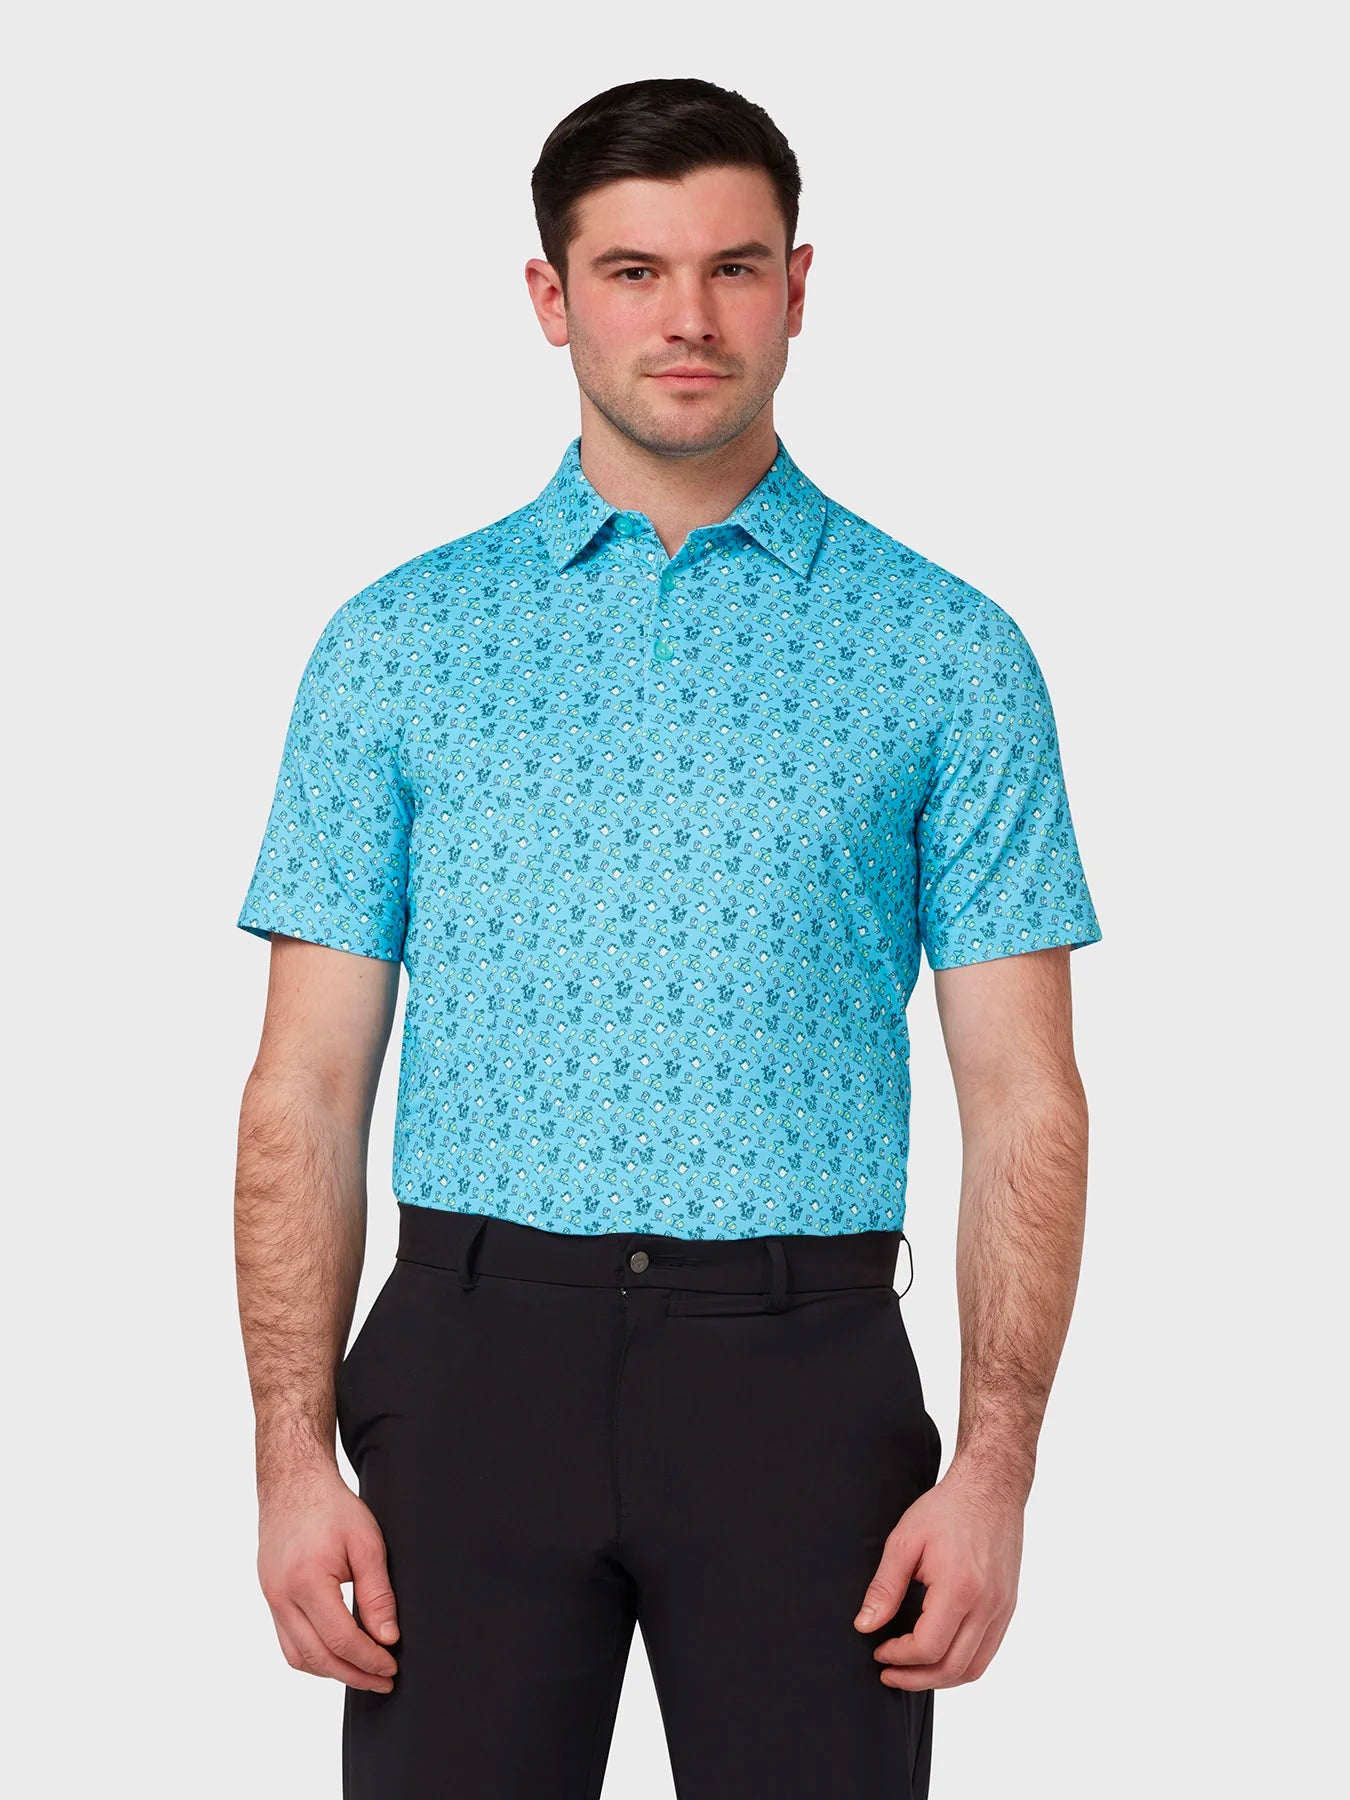 View All Over Drinks Novelty Print Polo In Blue Grotto Blue Grotto S information